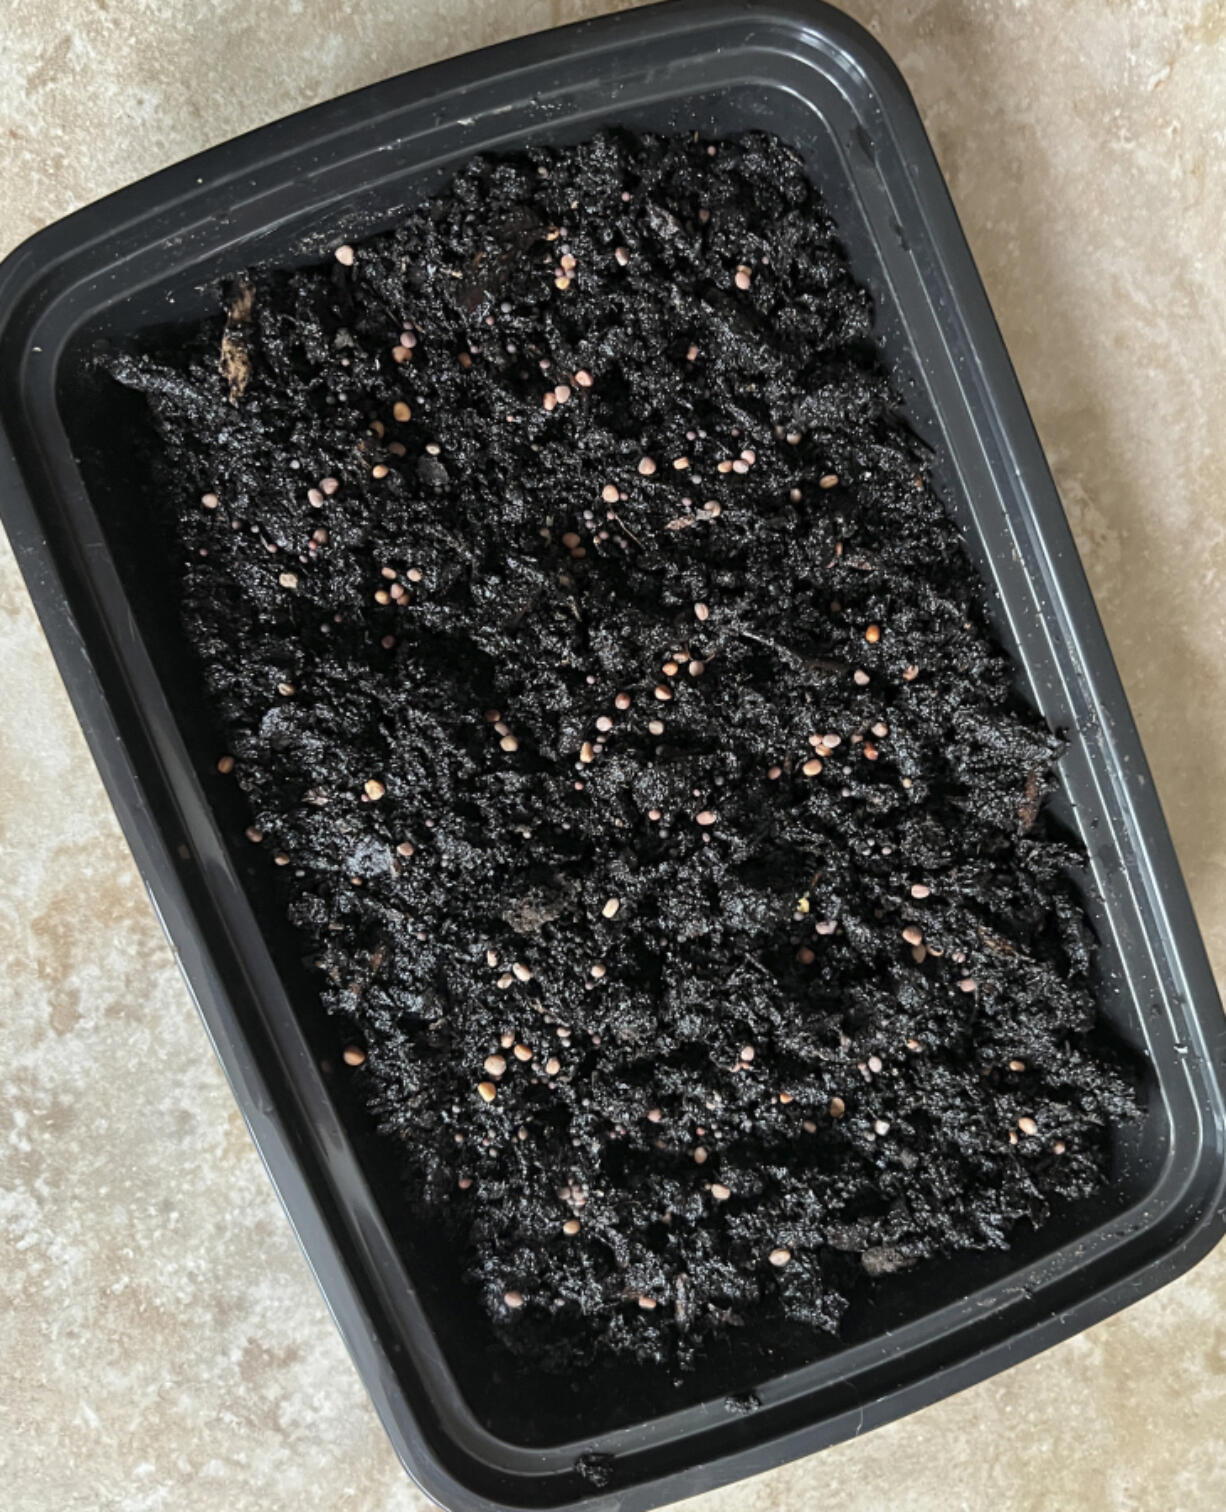 Sown seeds in a takeout food container for growing microgreens.